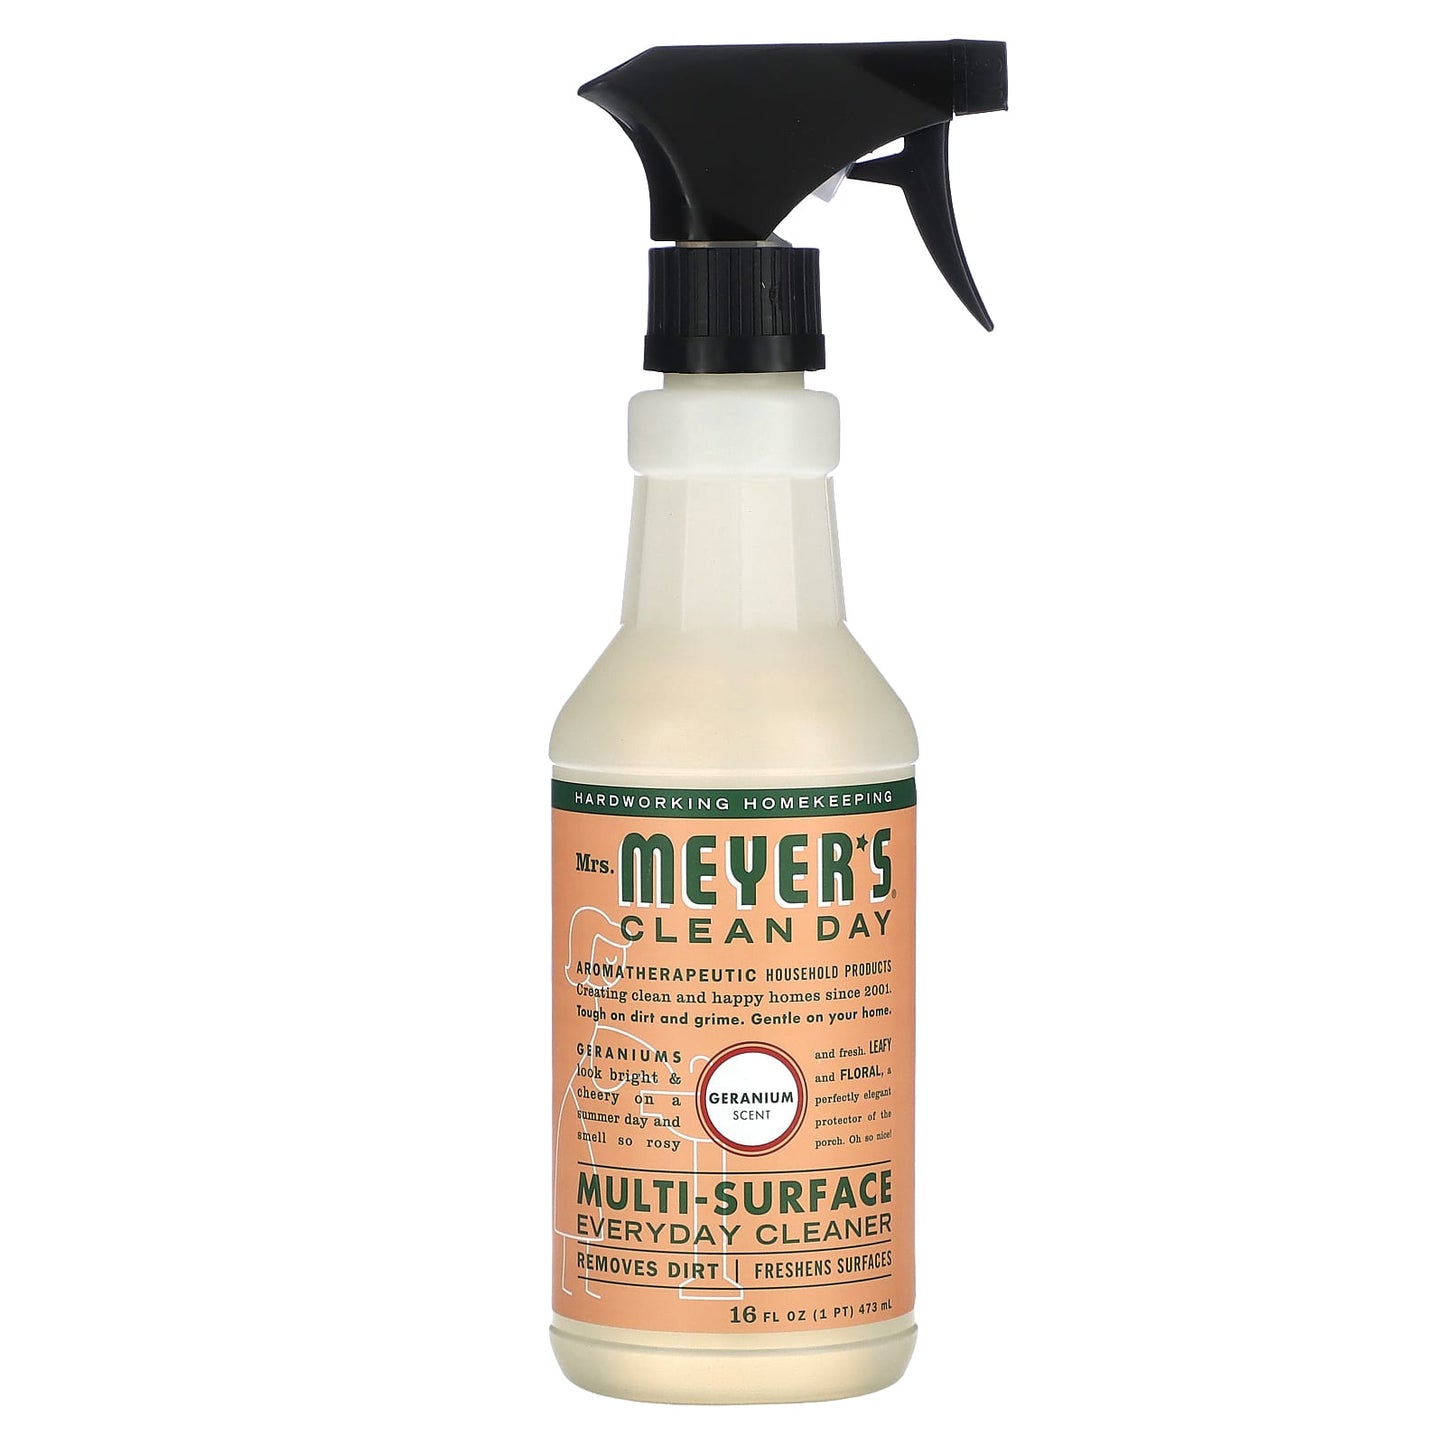 Mrs. Meyers Clean Day-Muti-Surface Everyday Cleaner-Geranium Scent-16 fl oz (473 ml)